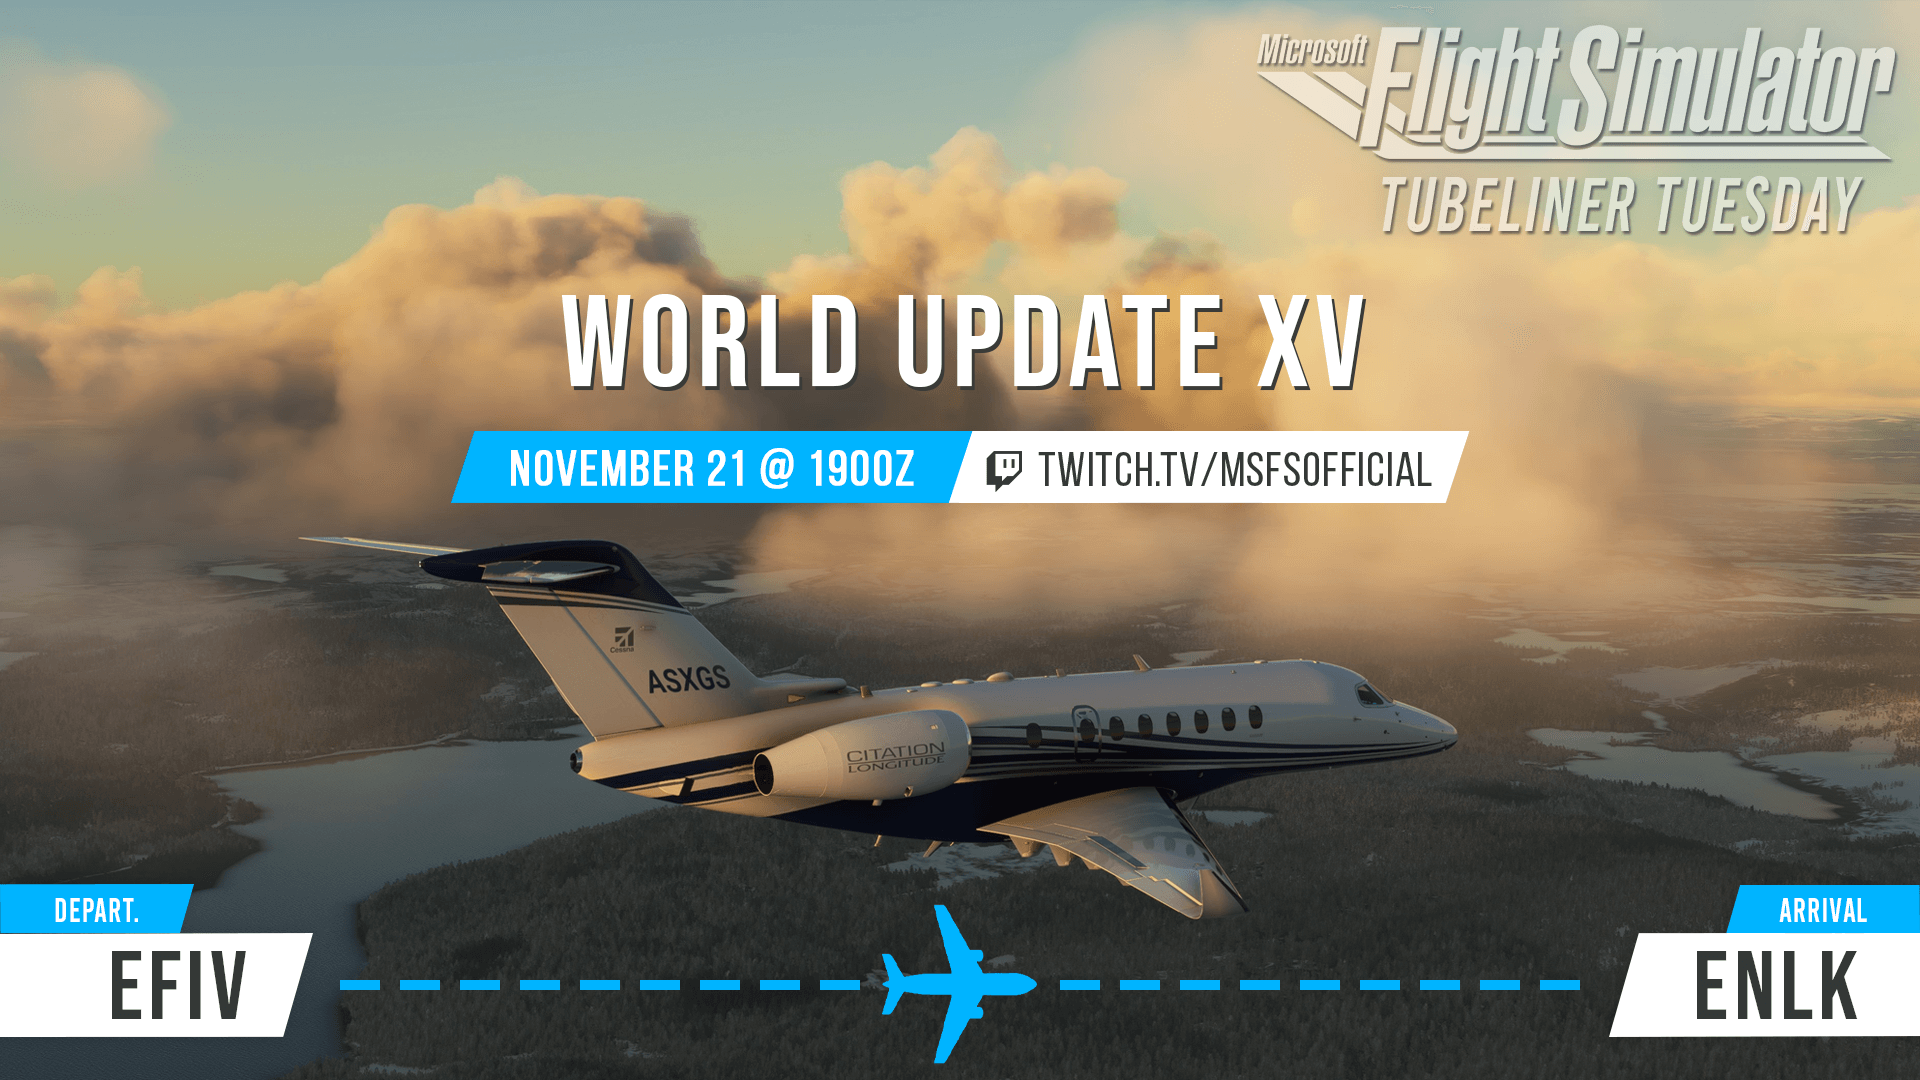 Tuberliner Tuesday: World Update XV. November 21st at 1900Z. Watch at twitch.tv/msfsofficial